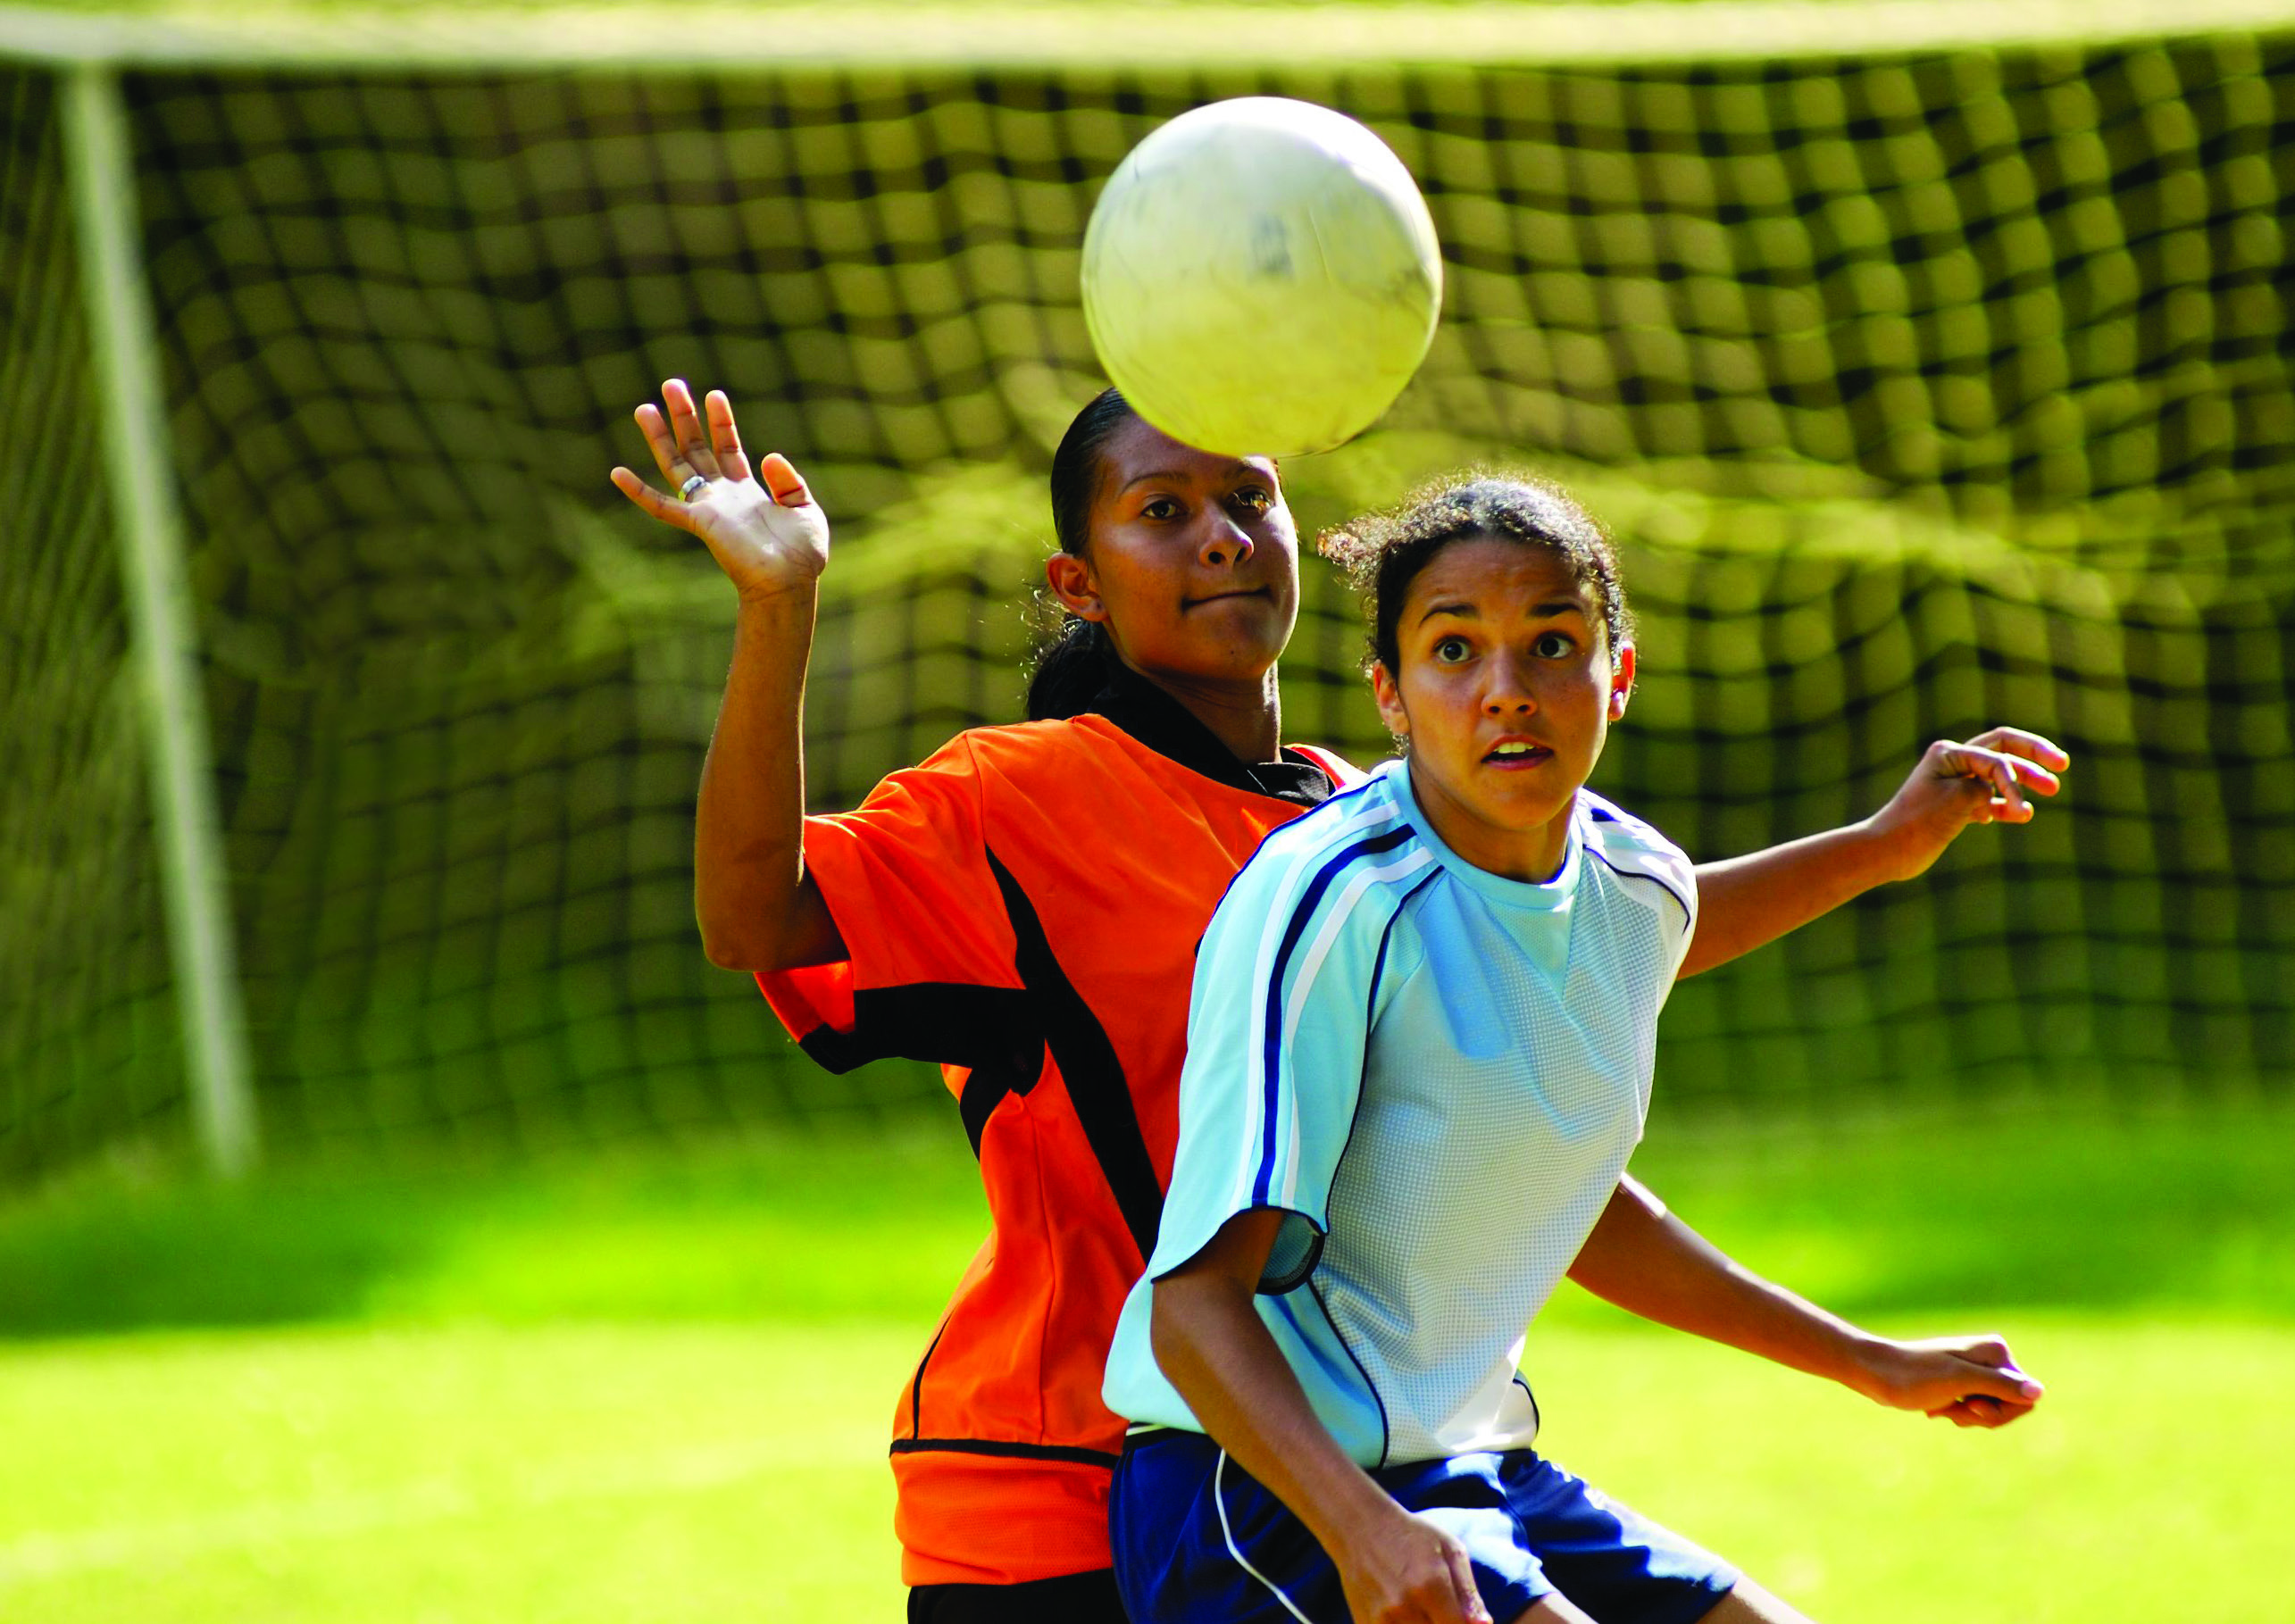 Two teenage girls are playing soccer on opposing teams as a ball flies toward the goal net.